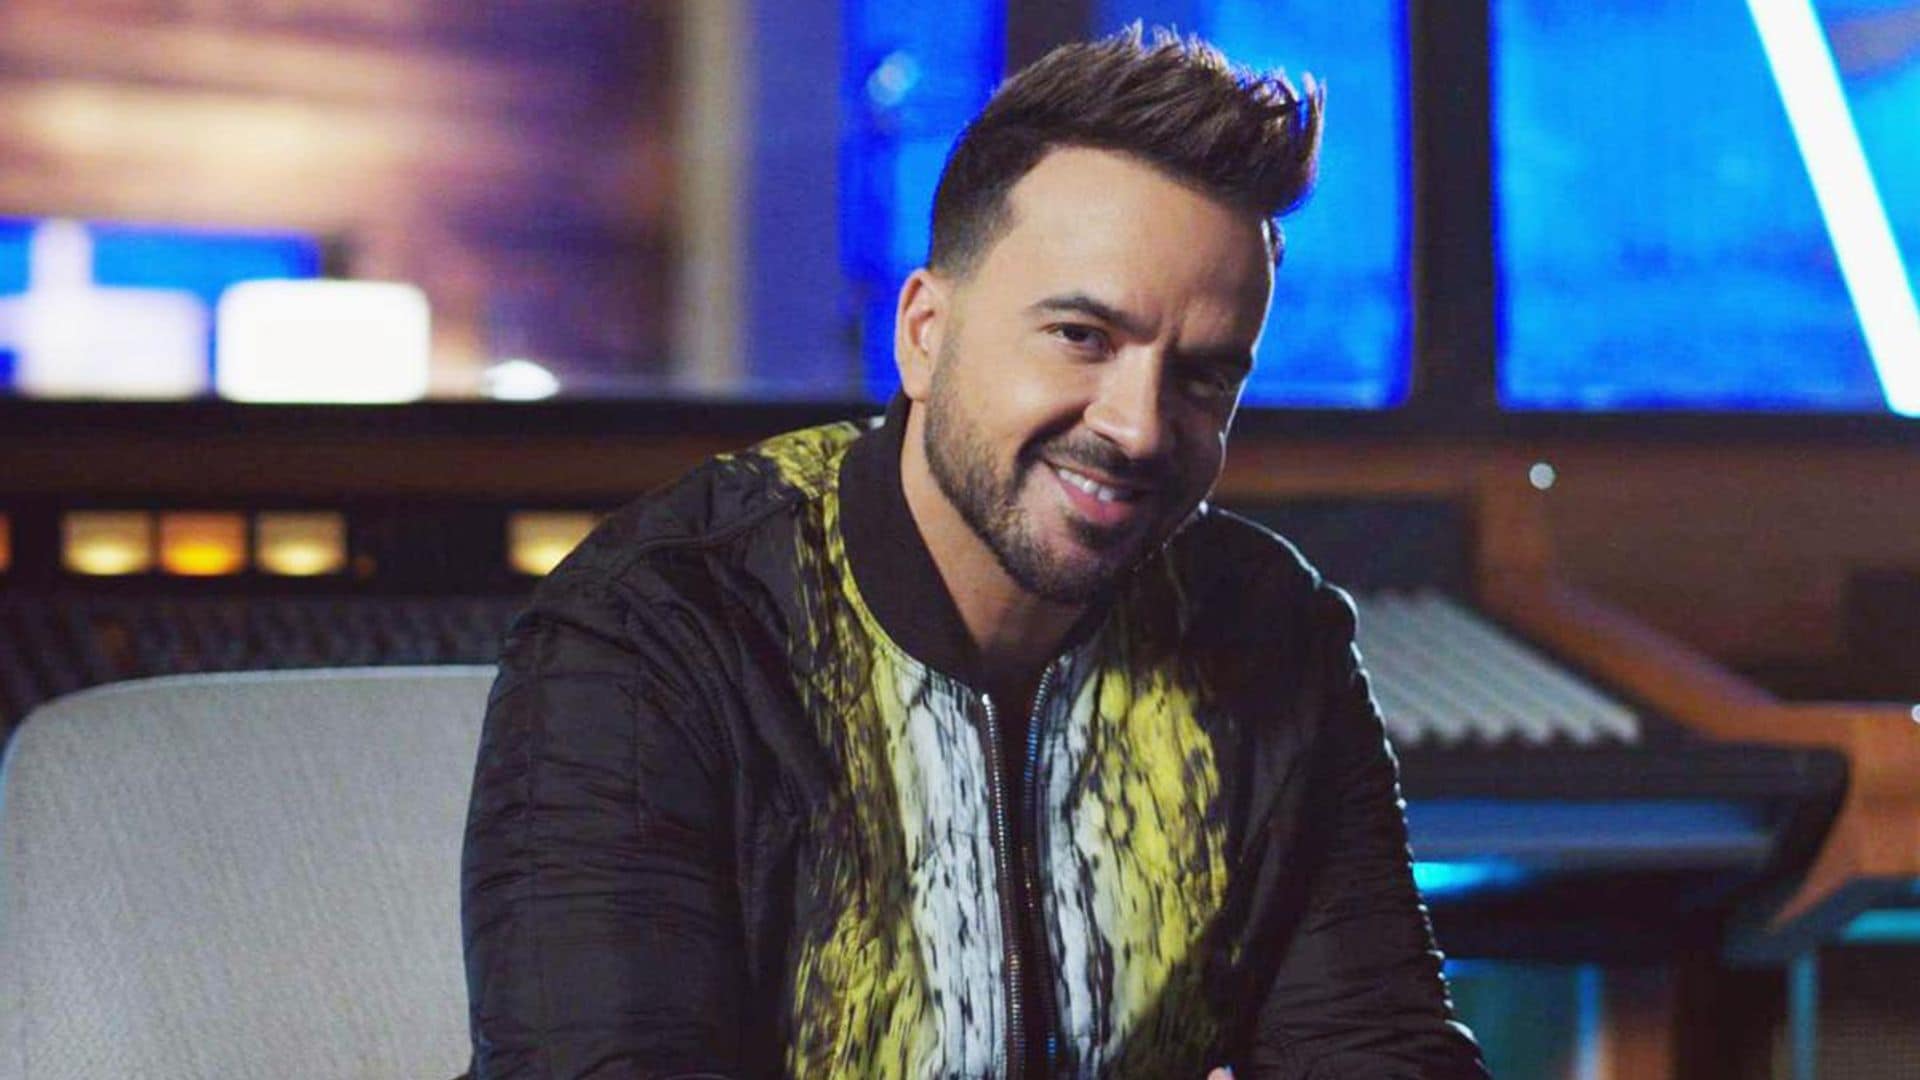 Luis Fonsi joins Alzheimer’s Association to raise awareness and honor his grandmother